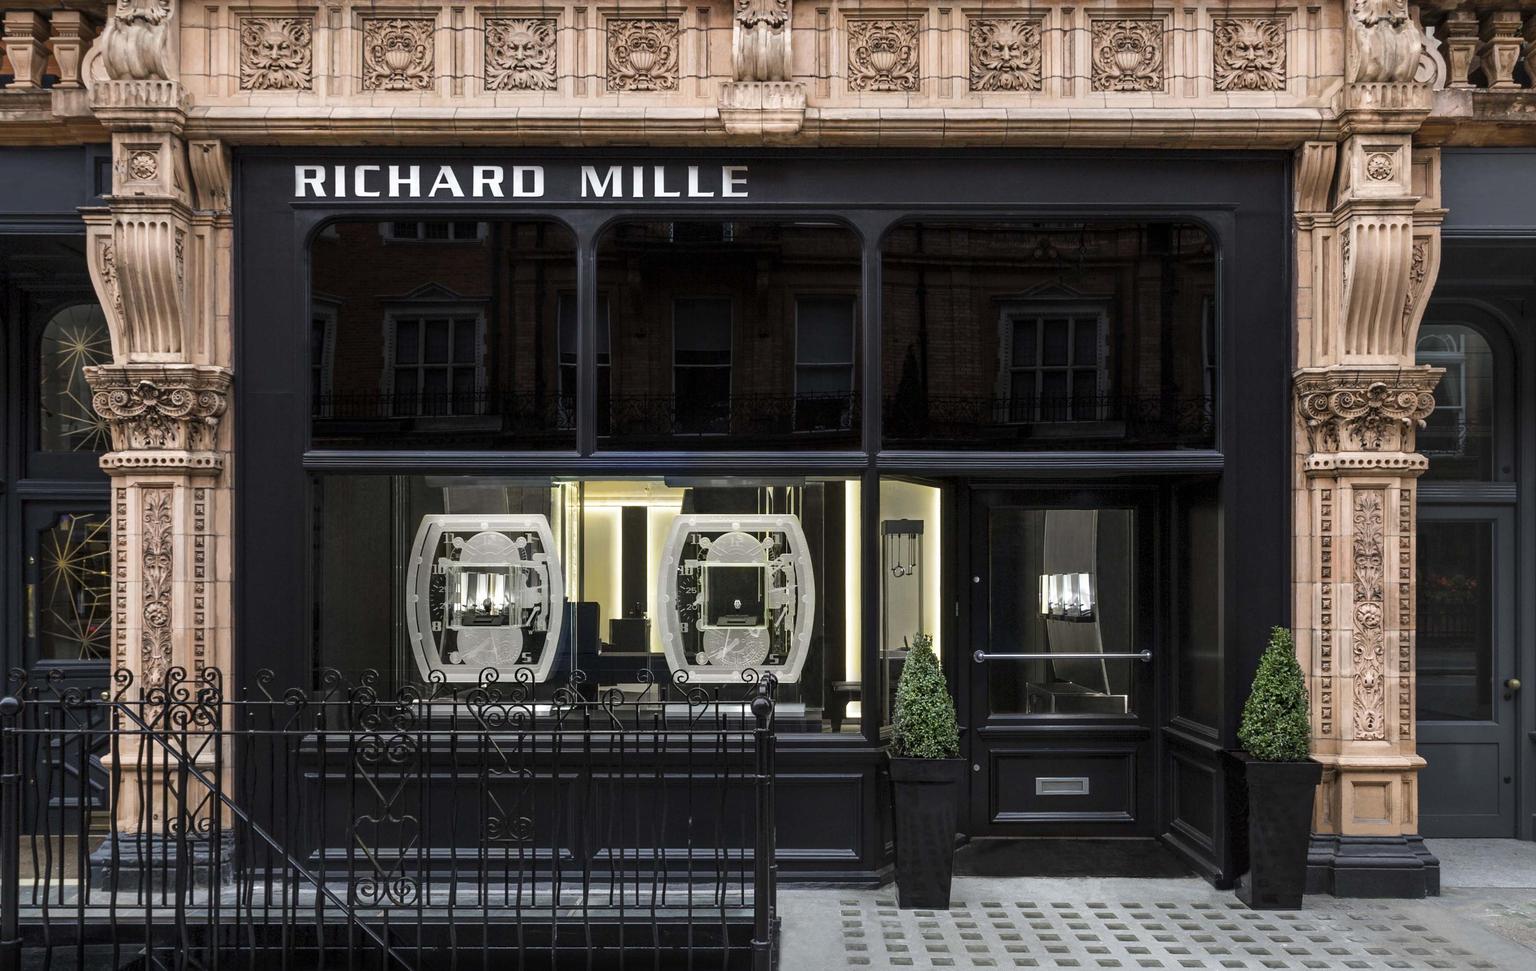 The facade of Richard Mille's new boutique in the exclusive Mayfair district of London, which is fast establishing itself as the new Mecca for high-end watch and jewellery brands.